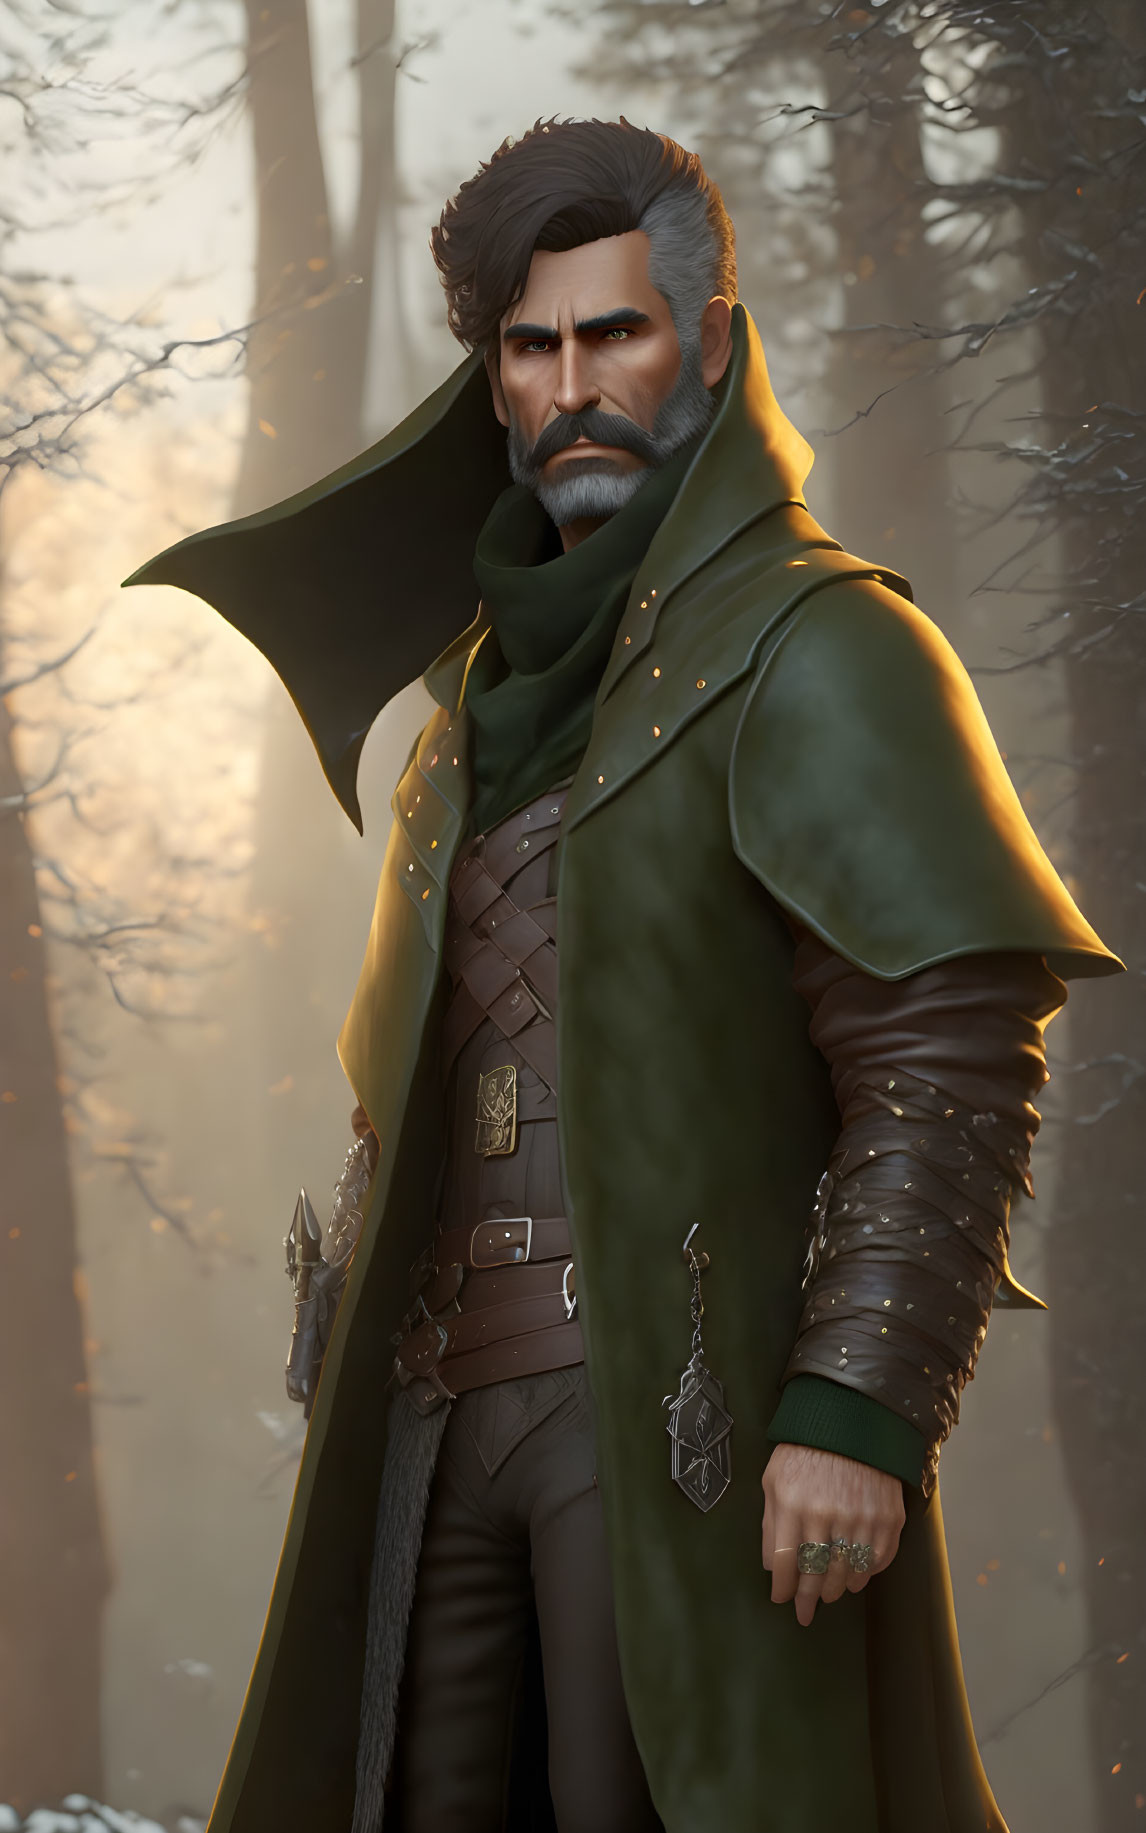 Bearded man in fantasy costume with green cloak in misty forest